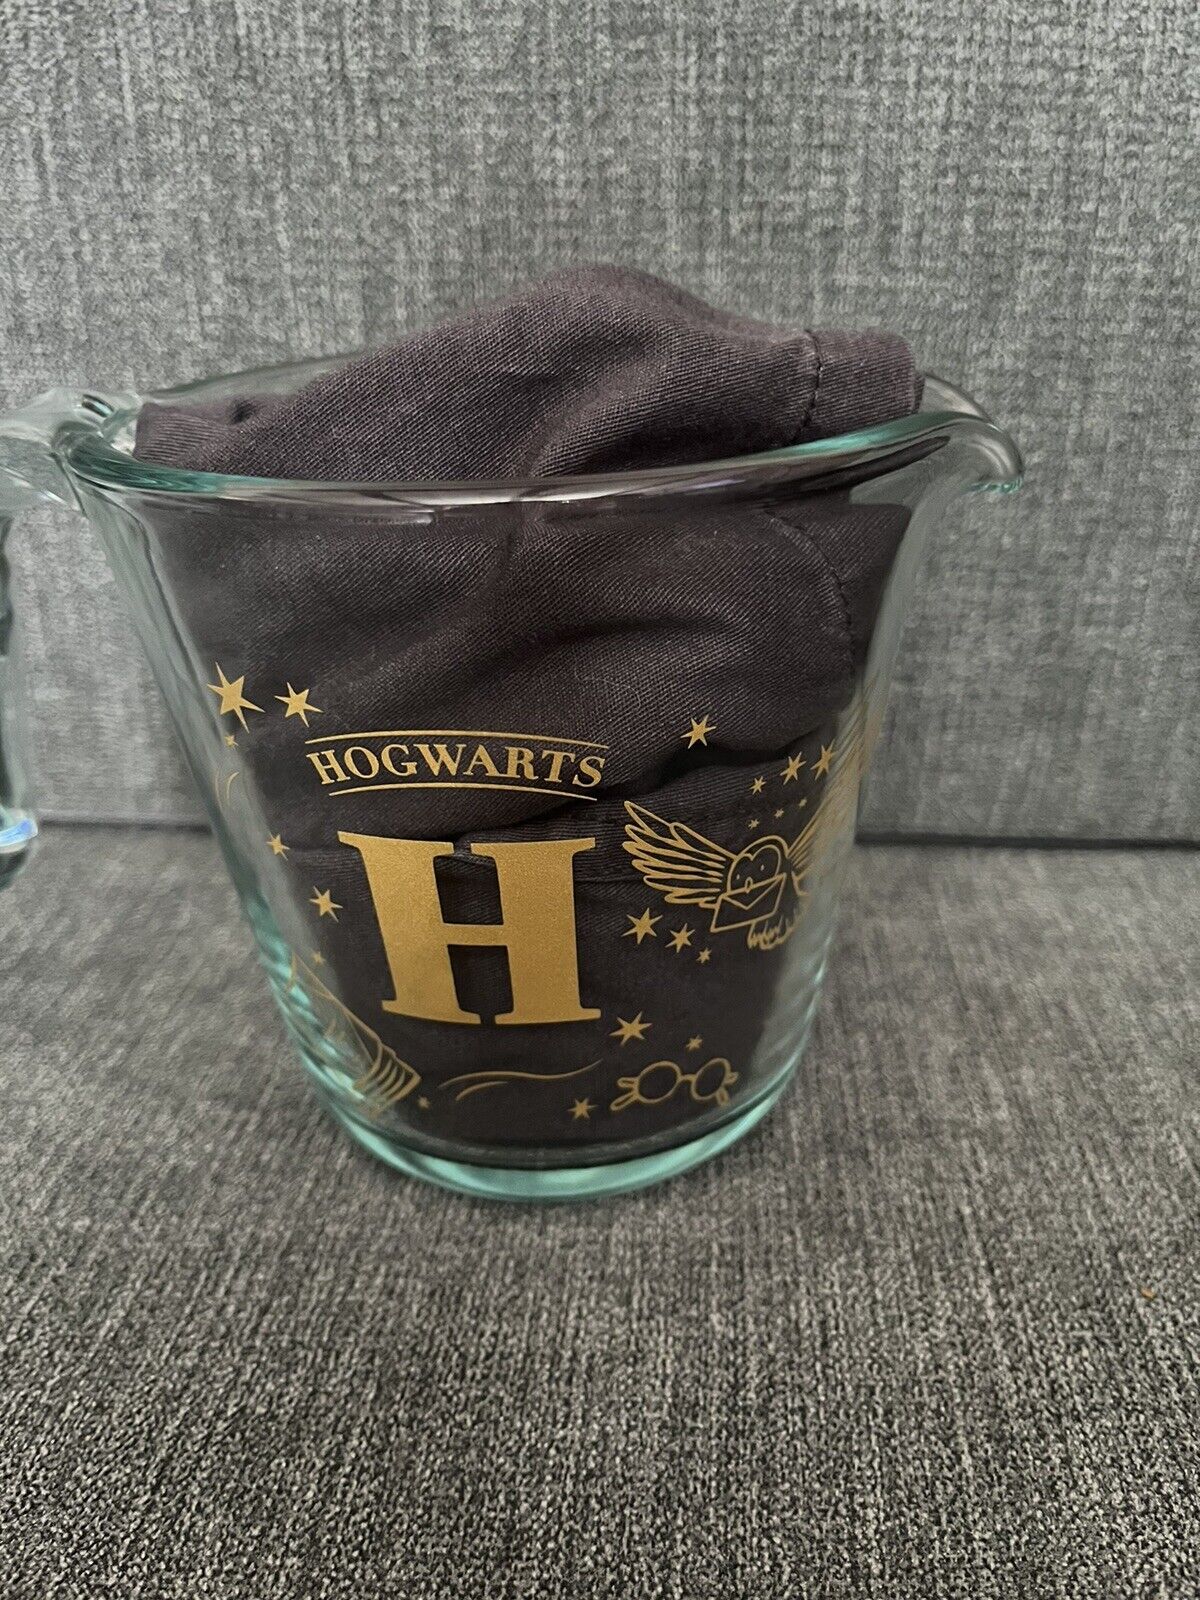 PYREX Harry Potter Hogwarts Glass Measuring Cup Size 2 Cup Clear Gold New